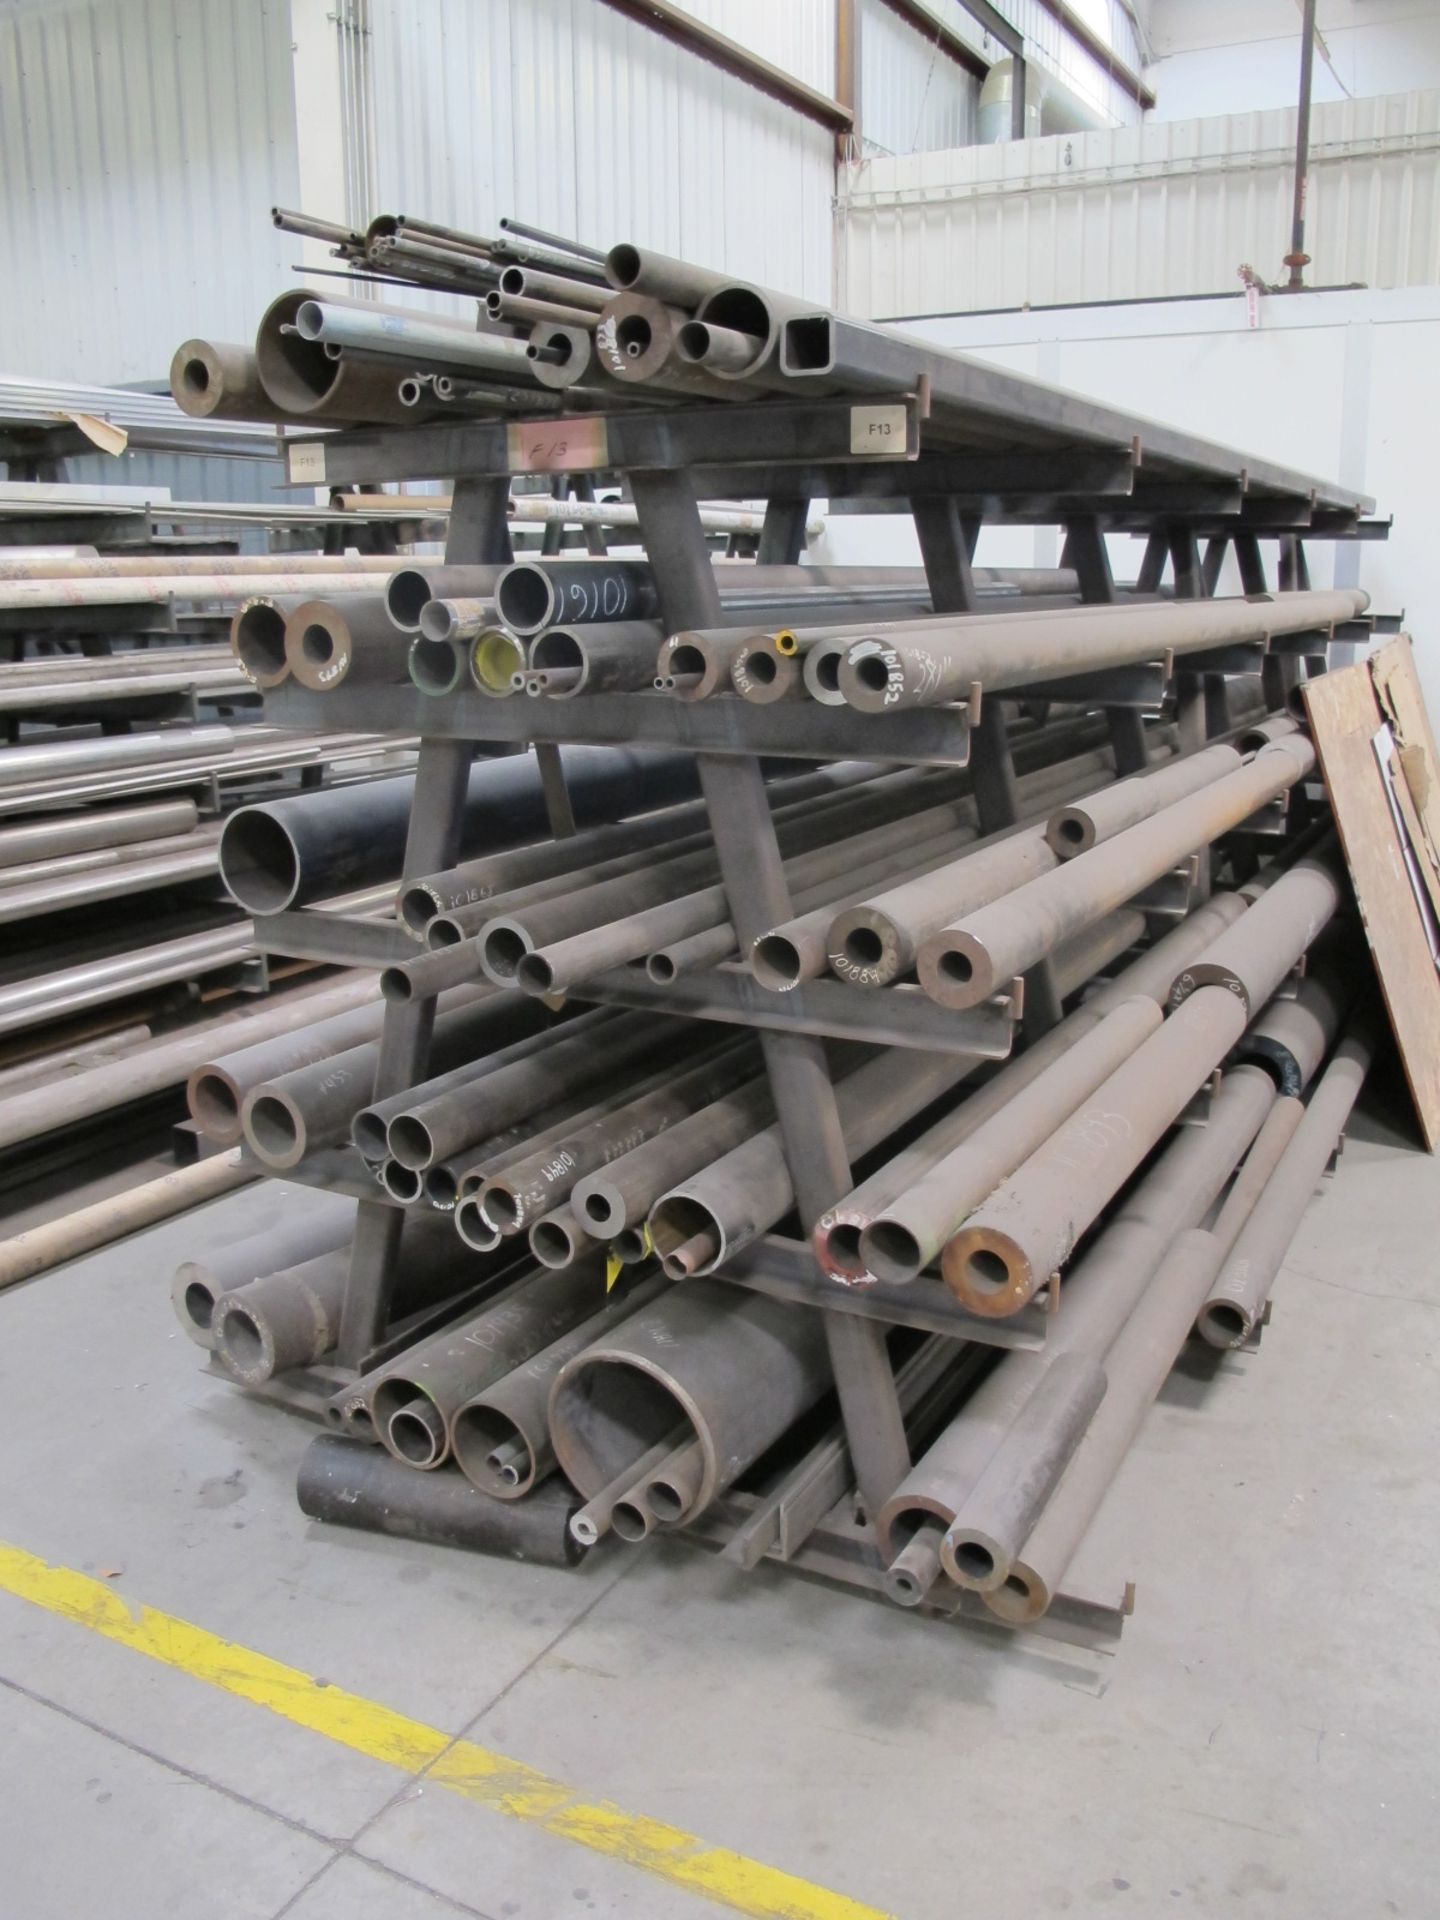 Raw Materials including aluminum bar and tube stock to 6 Â½â€, plate stock, rectangle and angle - Image 4 of 13